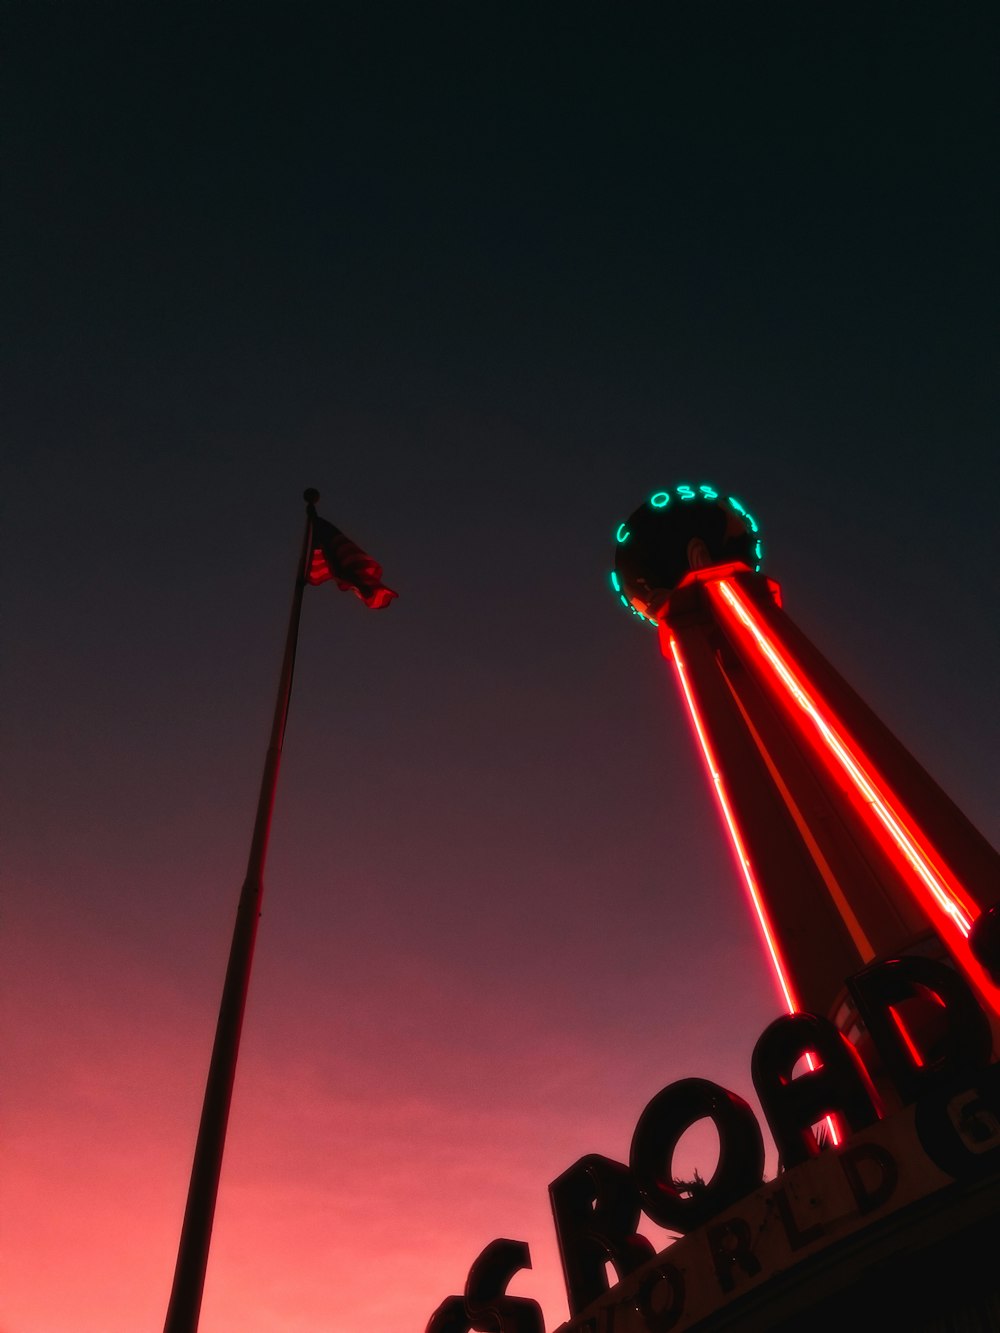 a red and green light shines on the top of a building